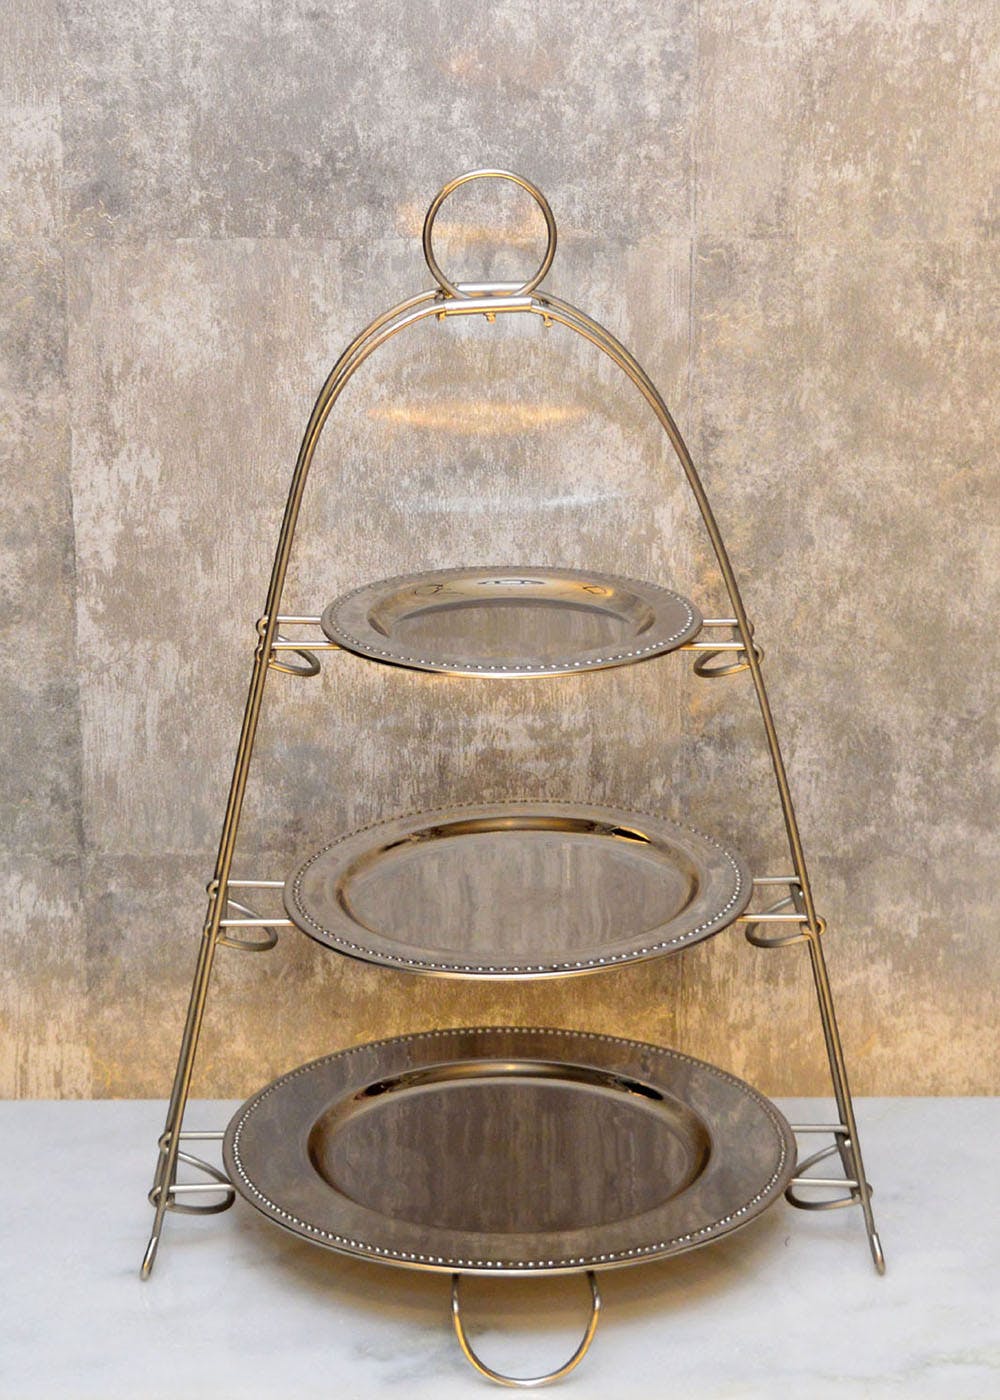 3-Tier Collapsible Cake Stand With Removable Plates